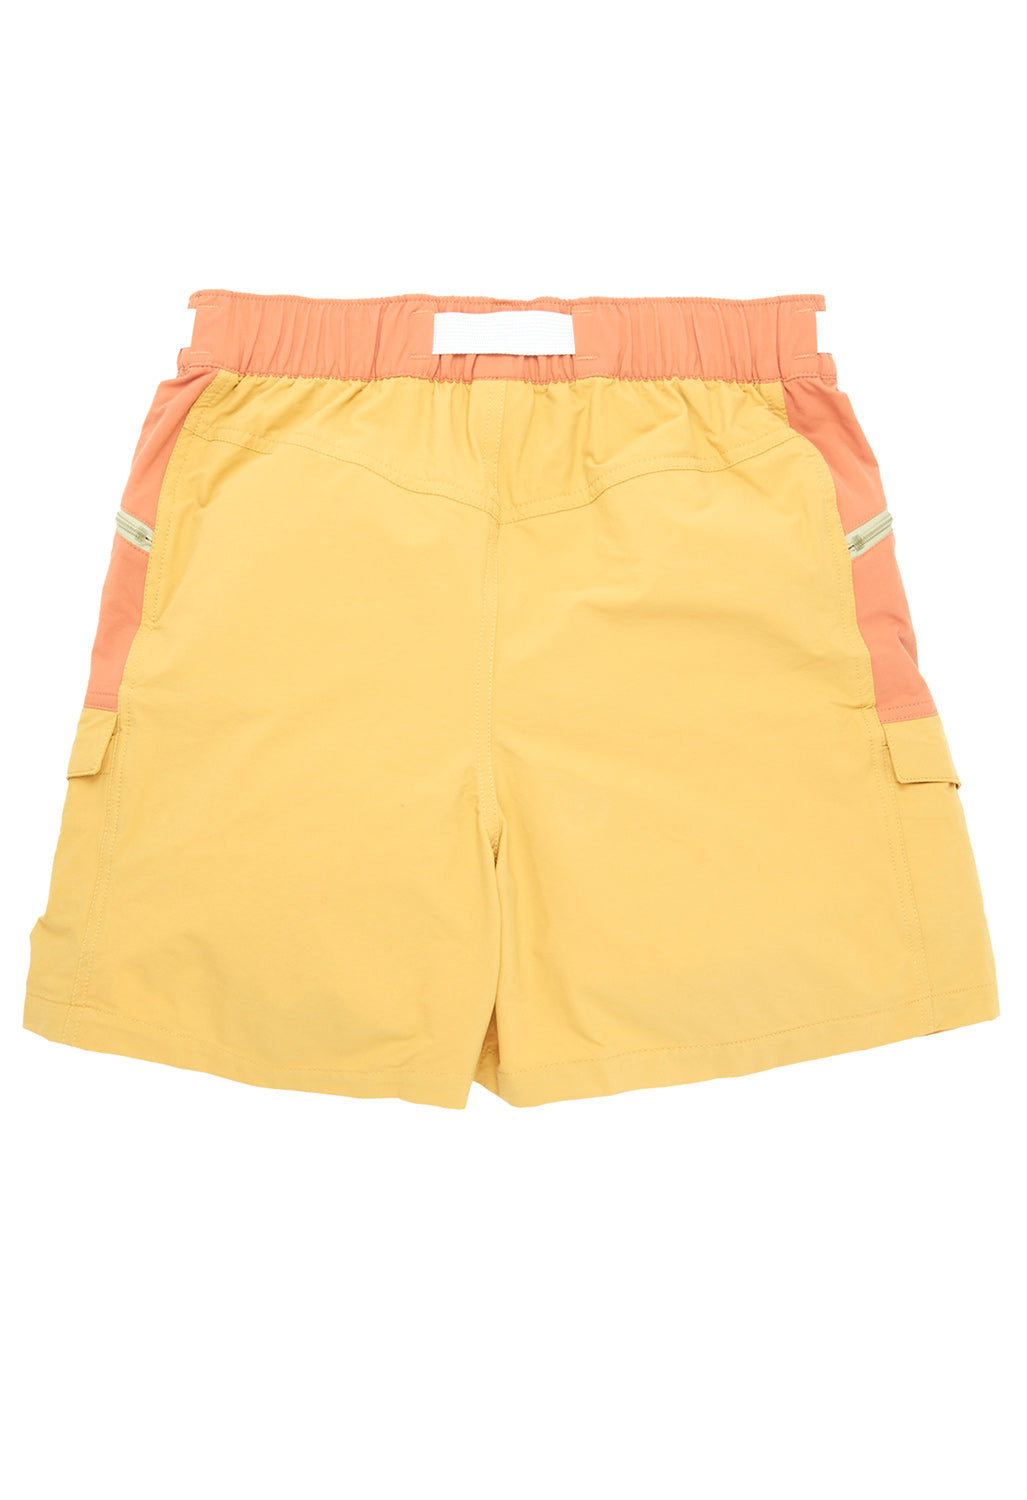 Patagonia Women's Outdoor Everyday Shorts - Pufferfish Gold